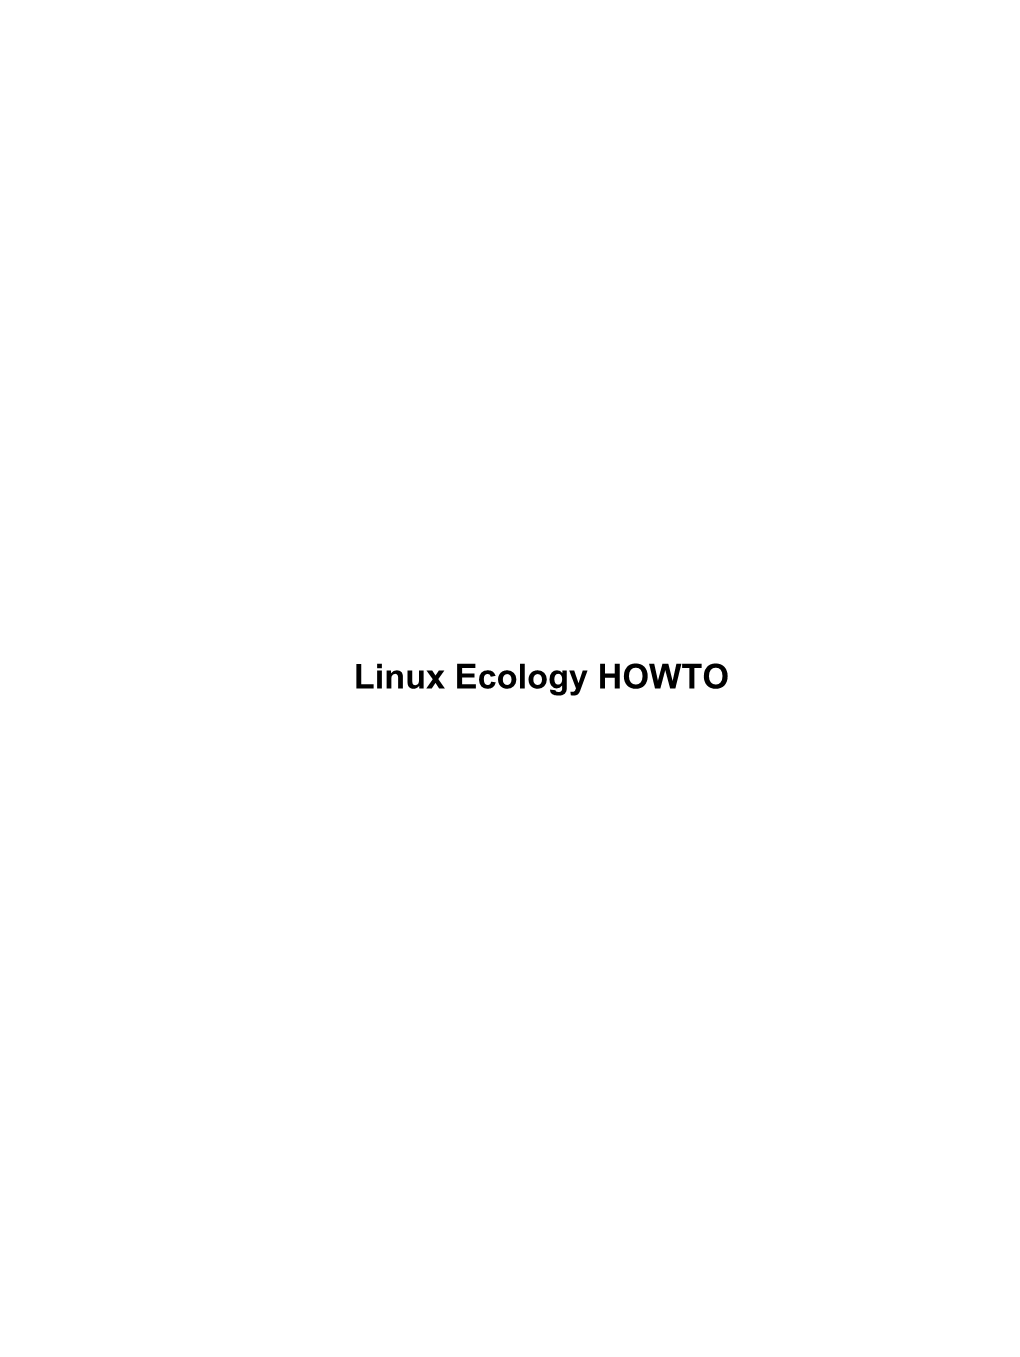 Linux Ecology HOWTO Linux Ecology HOWTO